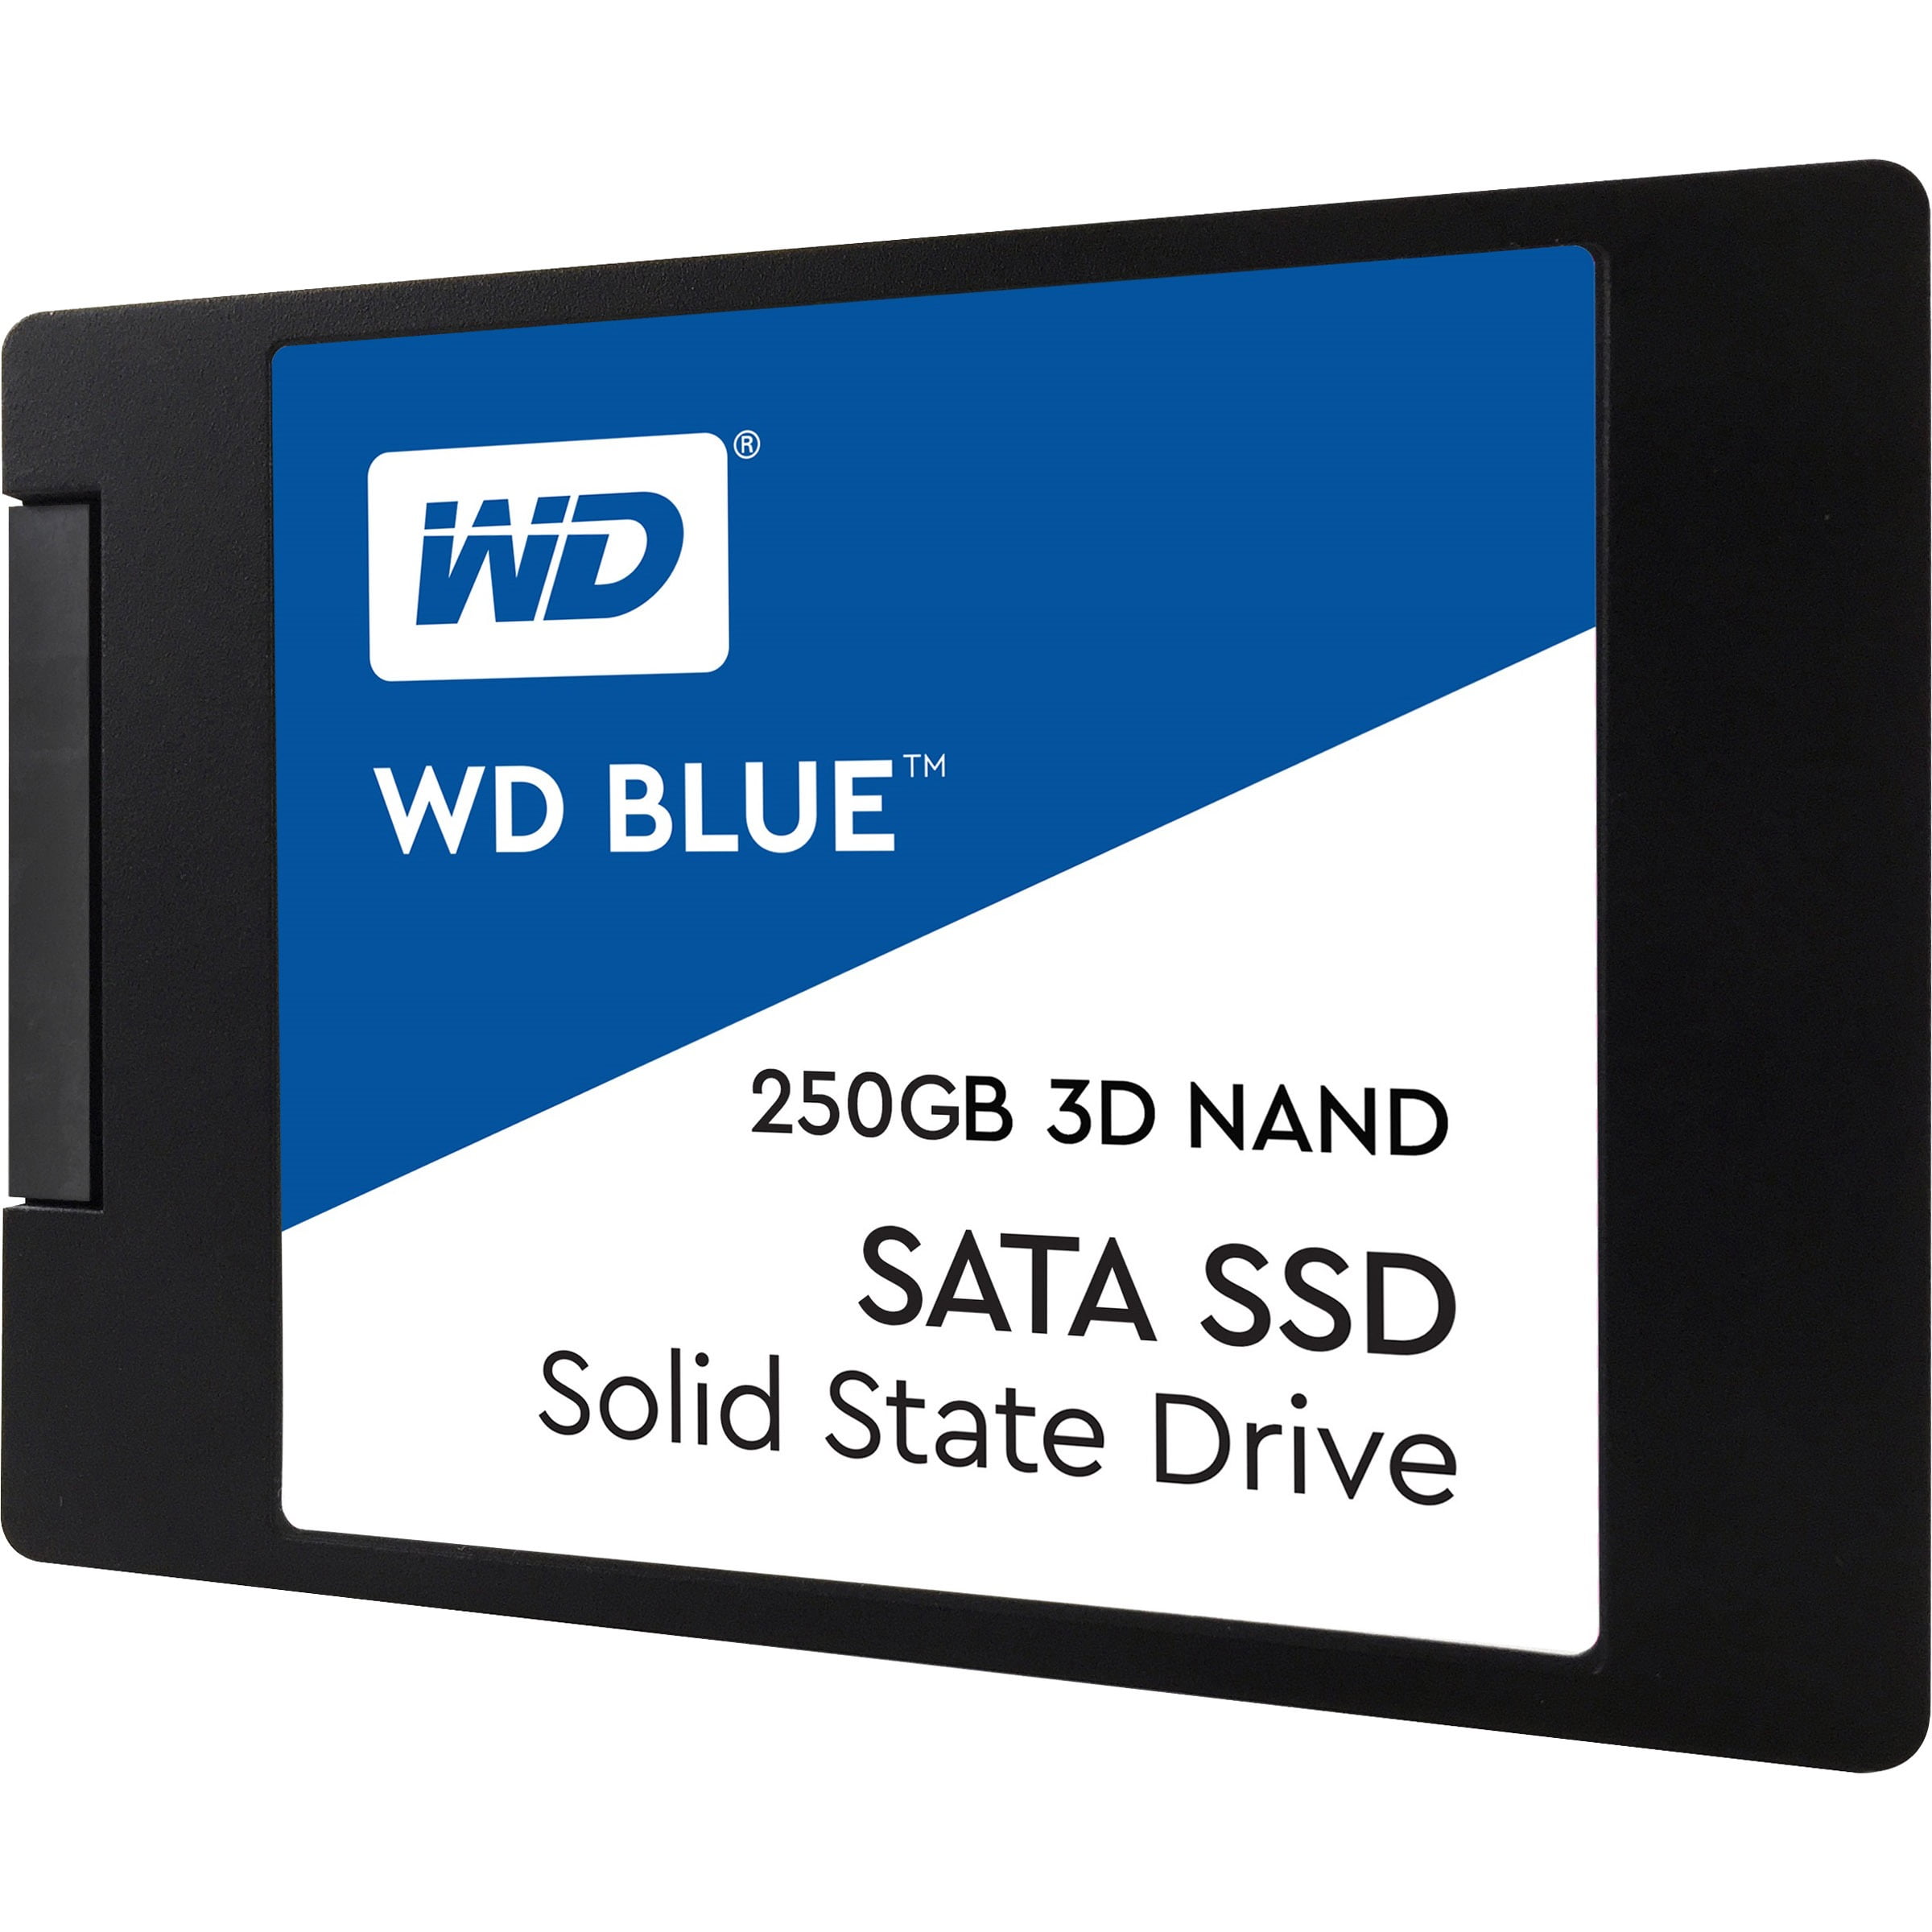 Available break up Brandy WD Blue 3D NAND 250GB SATA 2.5" 7mm SSD (Solid State Drive) - WDS250G2B0A -  Walmart.com